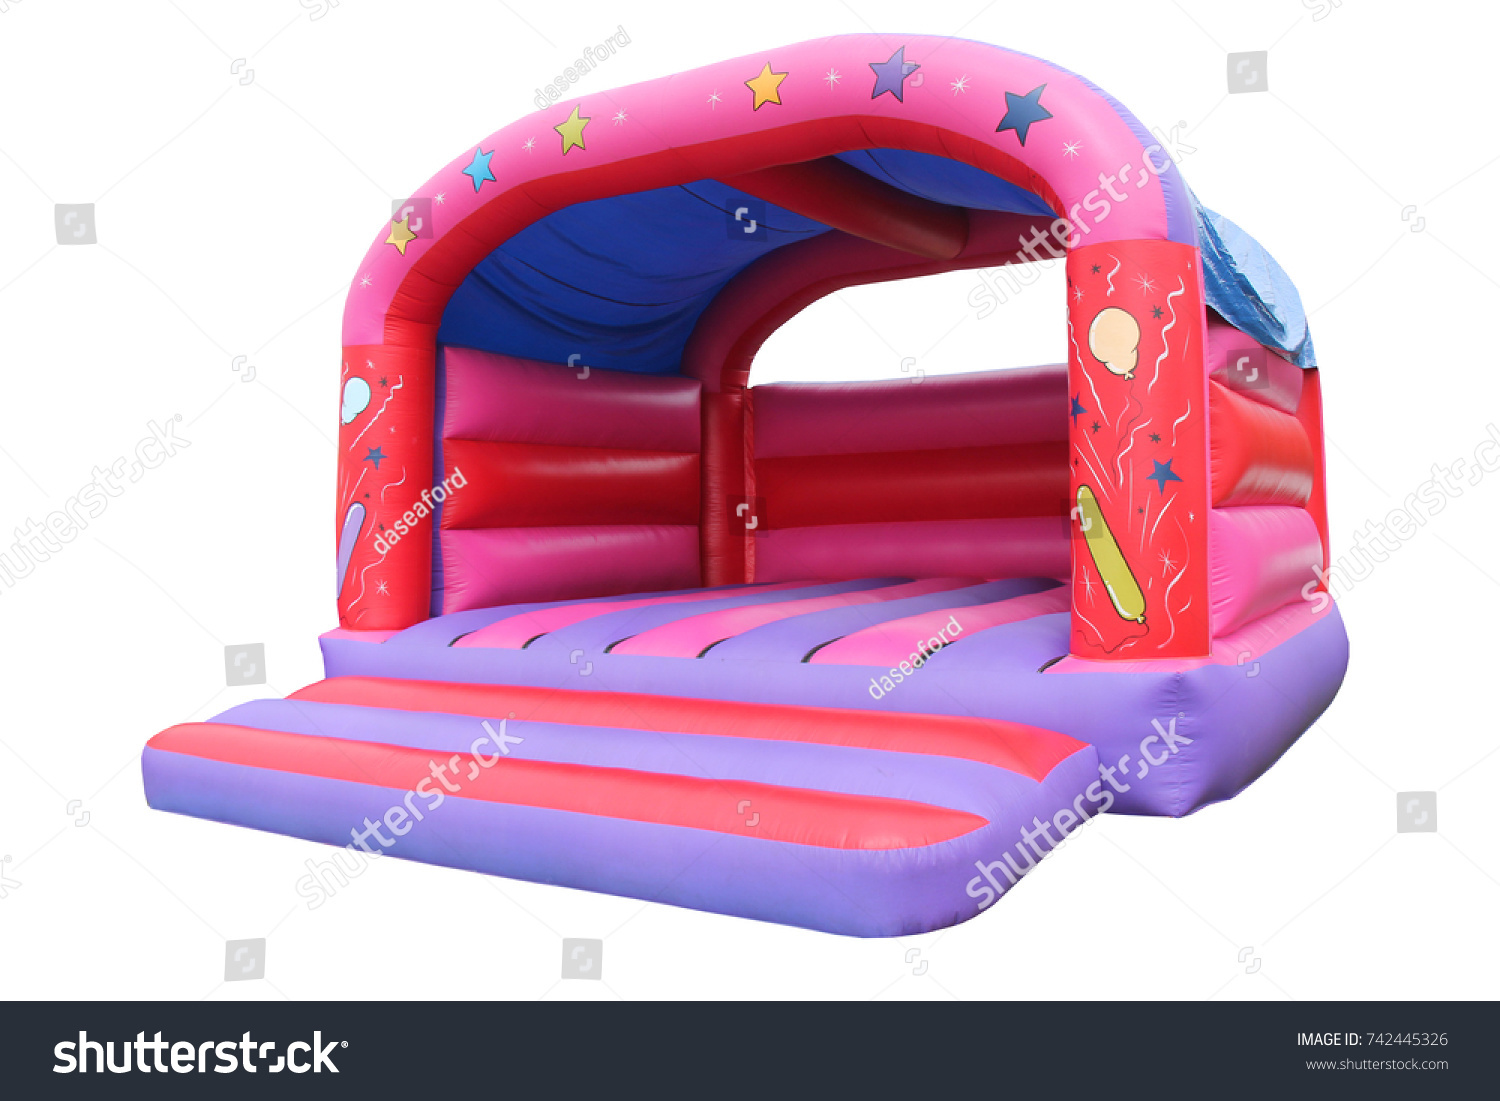 A Large Inflatable Bouncy Castle Childrens Play Area. #742445326